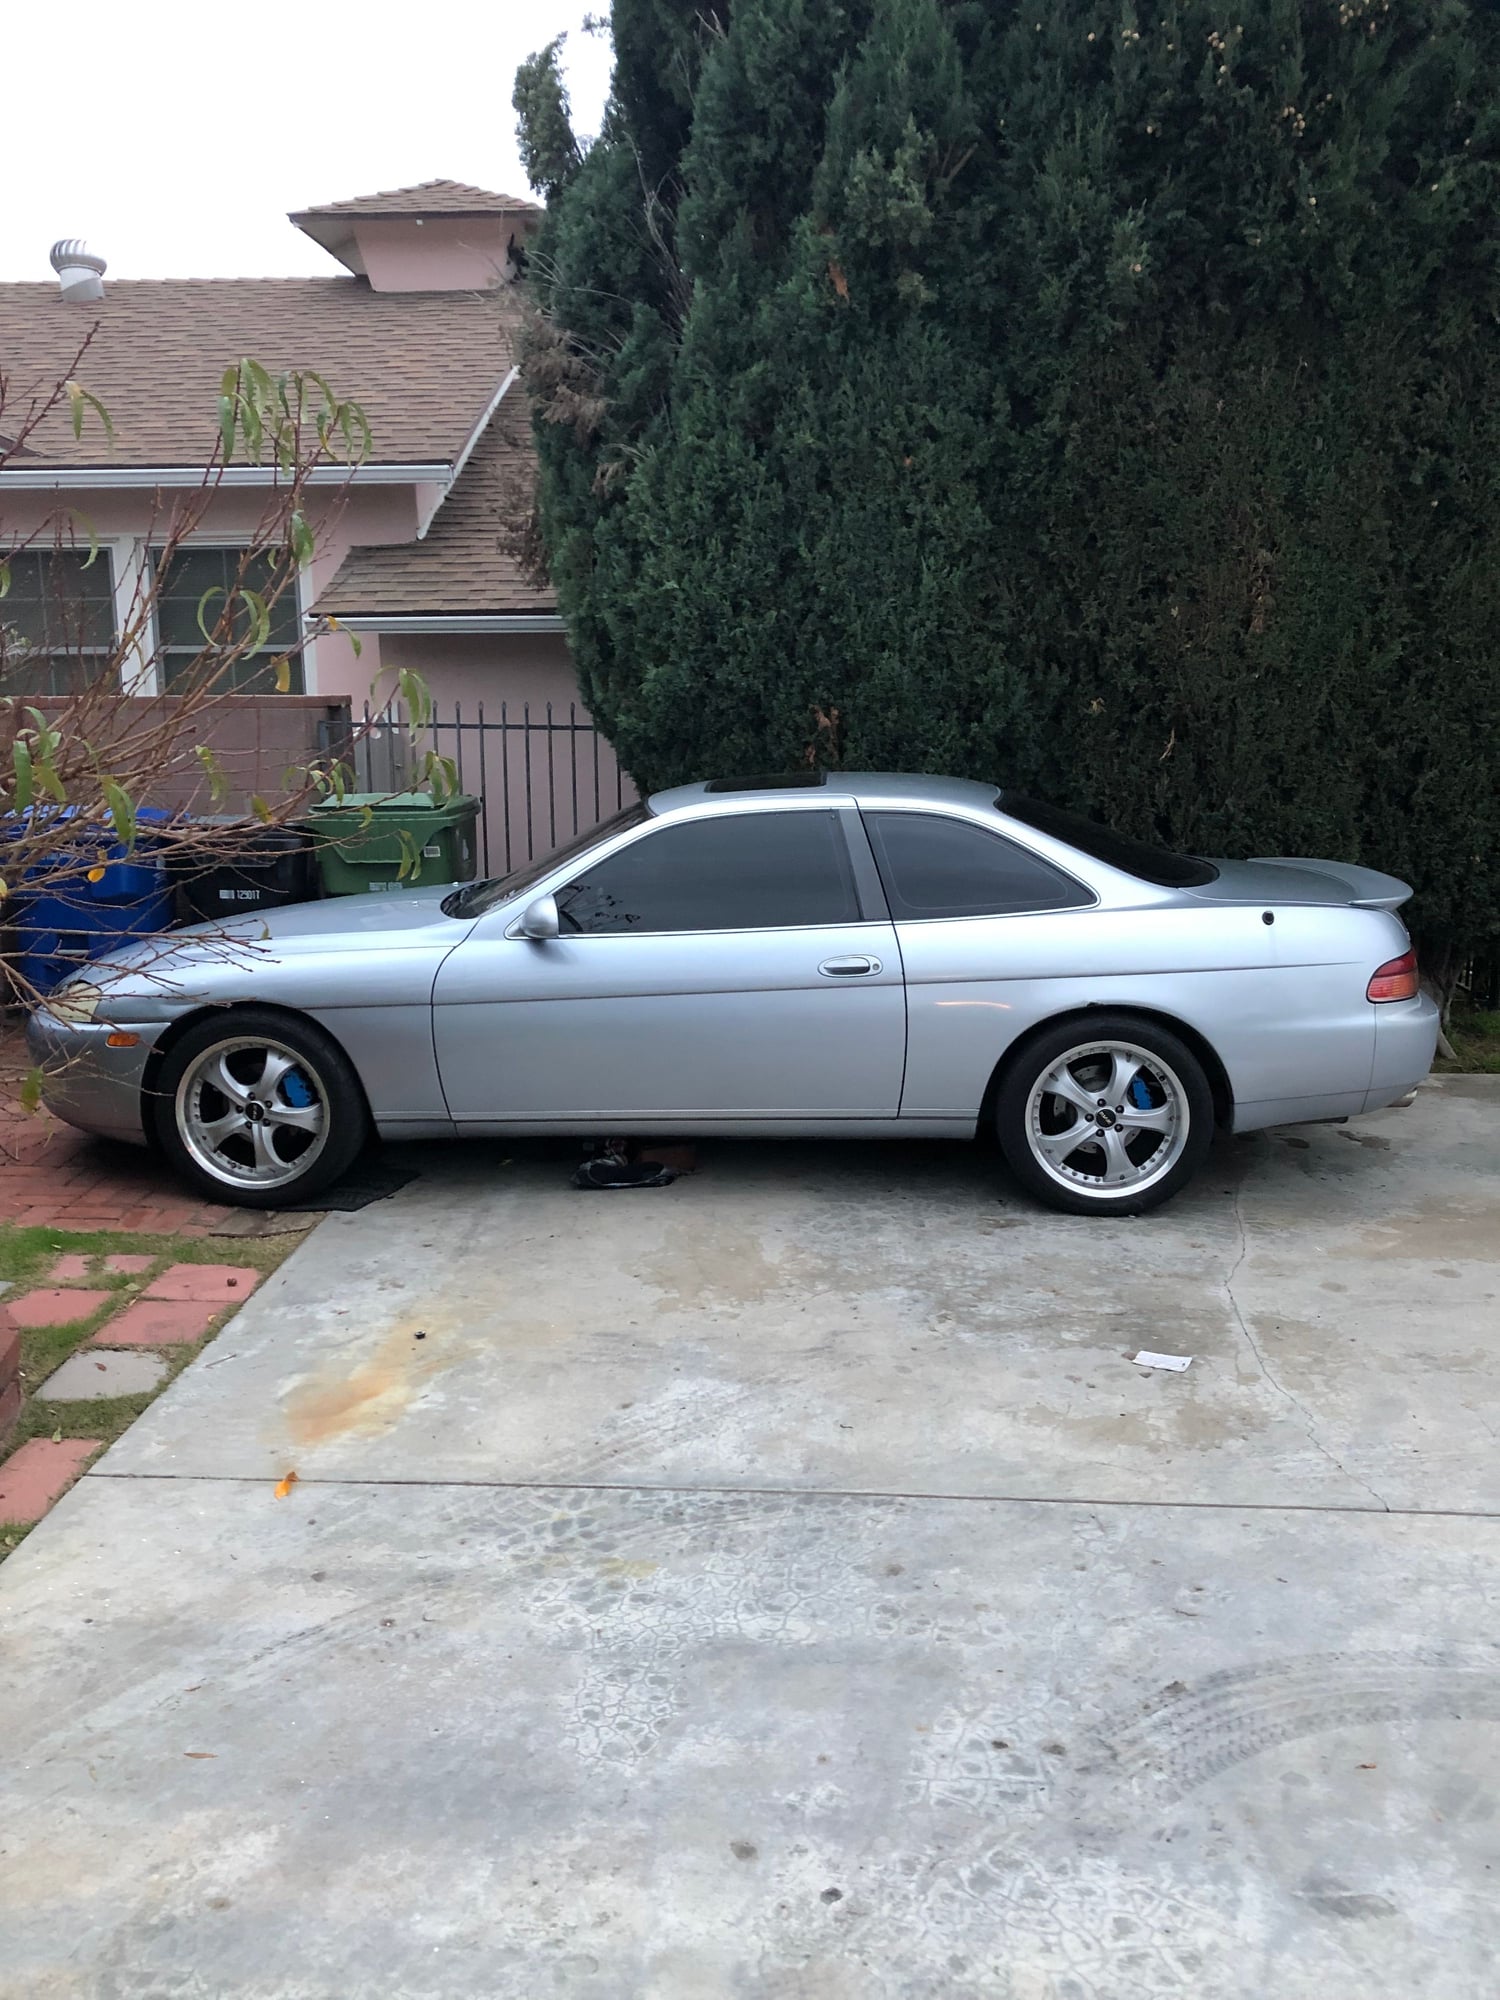 1995 Lexus SC300 - 1995 SC300 Needs TLC - Used - VIN JT8JZ31CXS0031102 - 273,649 Miles - 6 cyl - 2WD - Automatic - Coupe - Silver - Los Angeles, CA 91306, United States